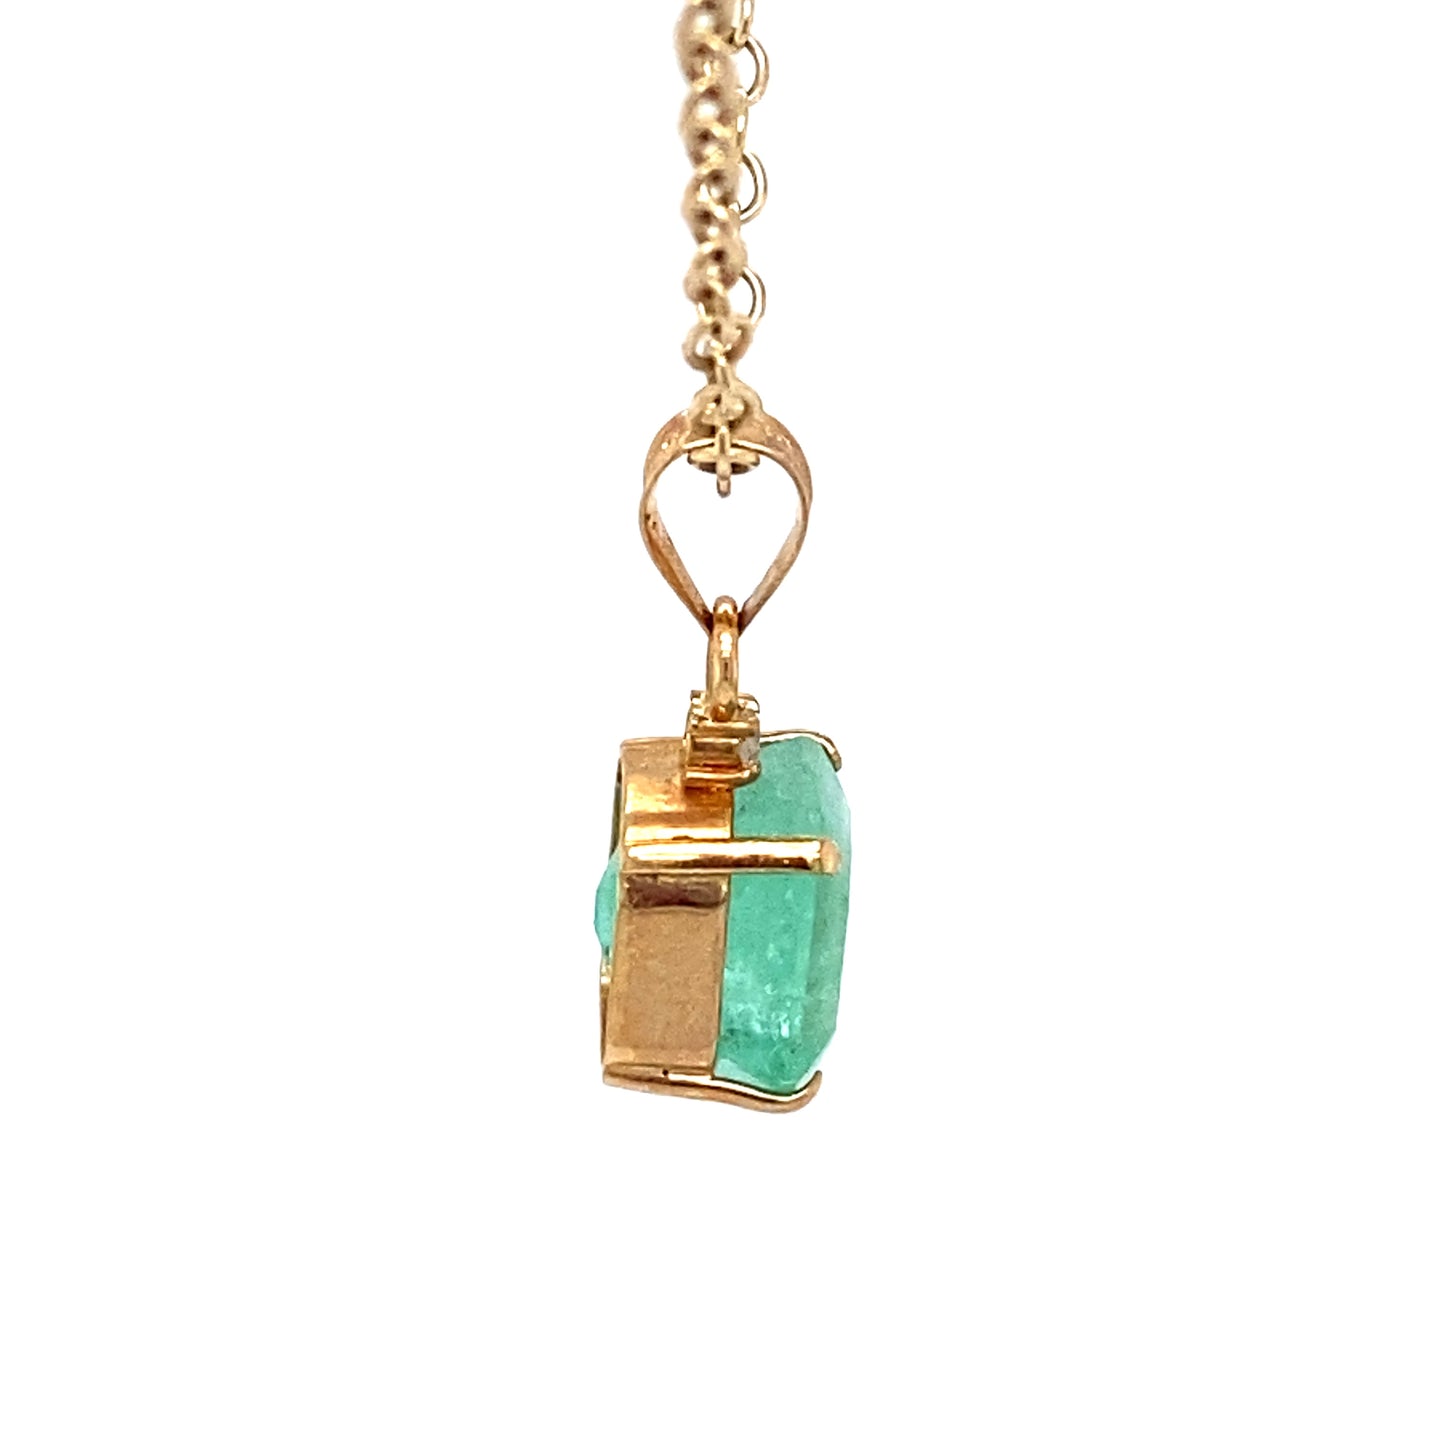 1.0 Carat Colombian Emerald and Diamond Pendant in 14K Gold